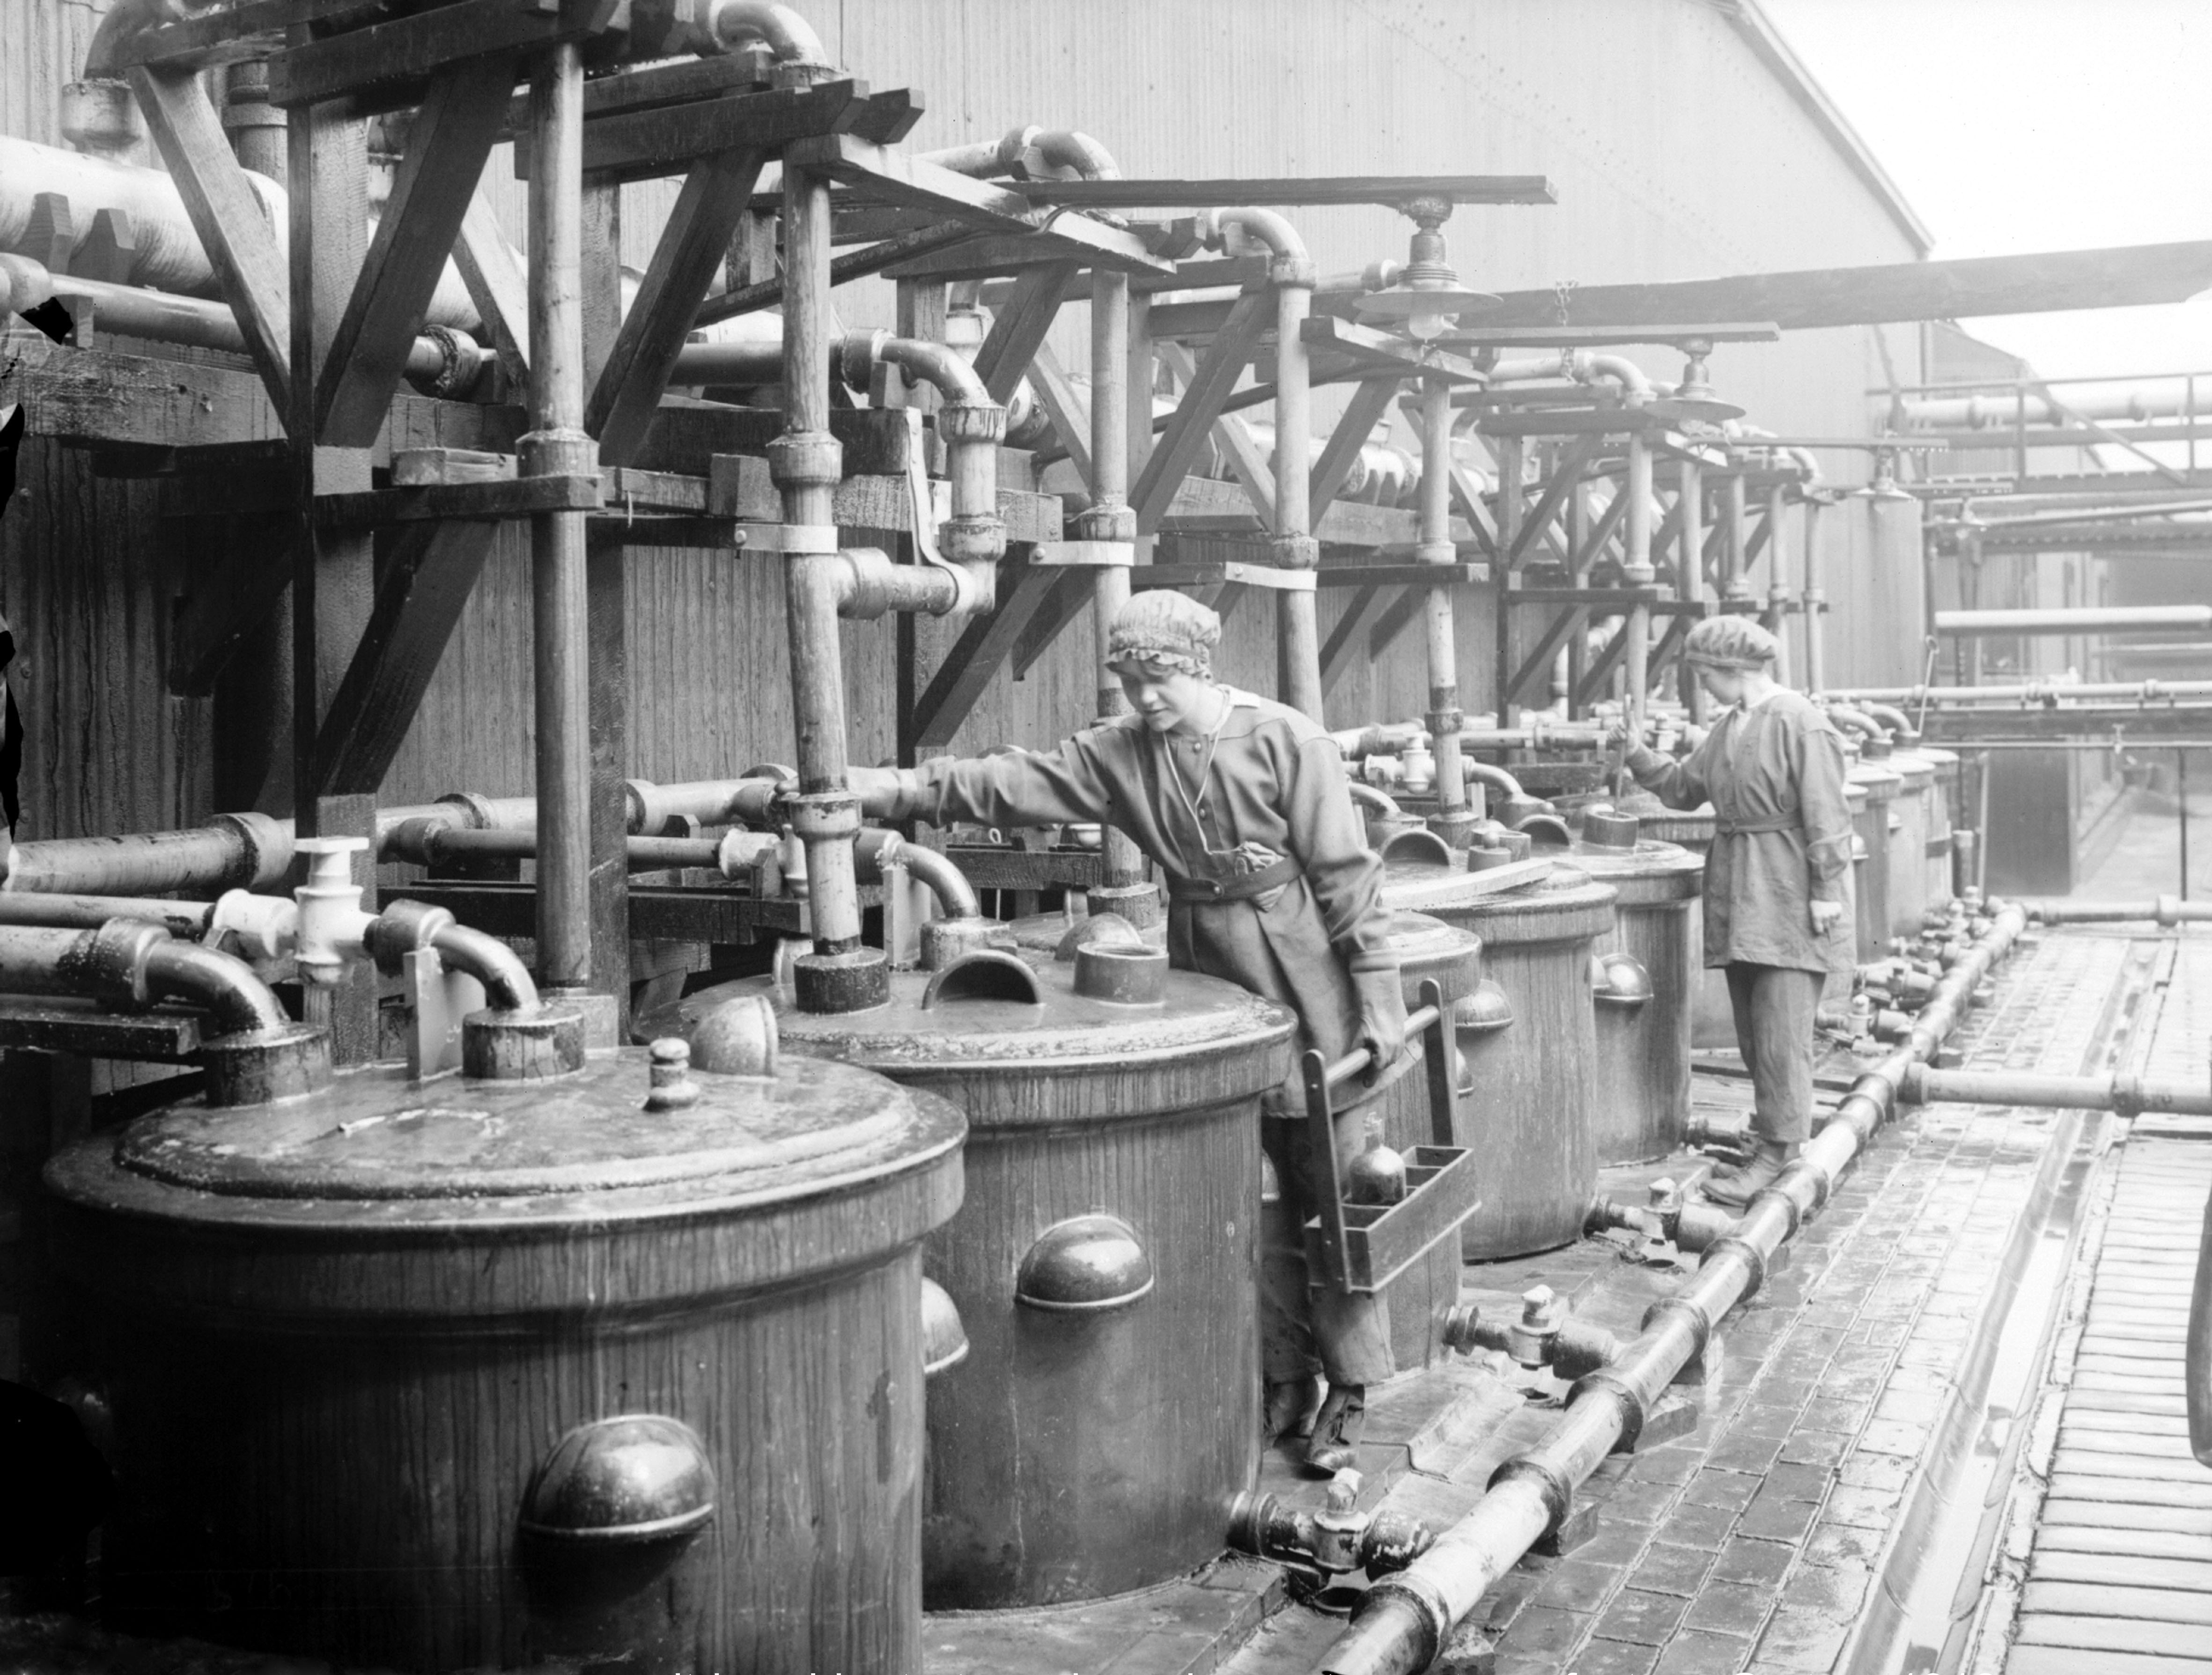 Nitric acid retorts and receivers in operation (12 July 1918), National Records of Scotland (archive reference: GD1/1011/61)